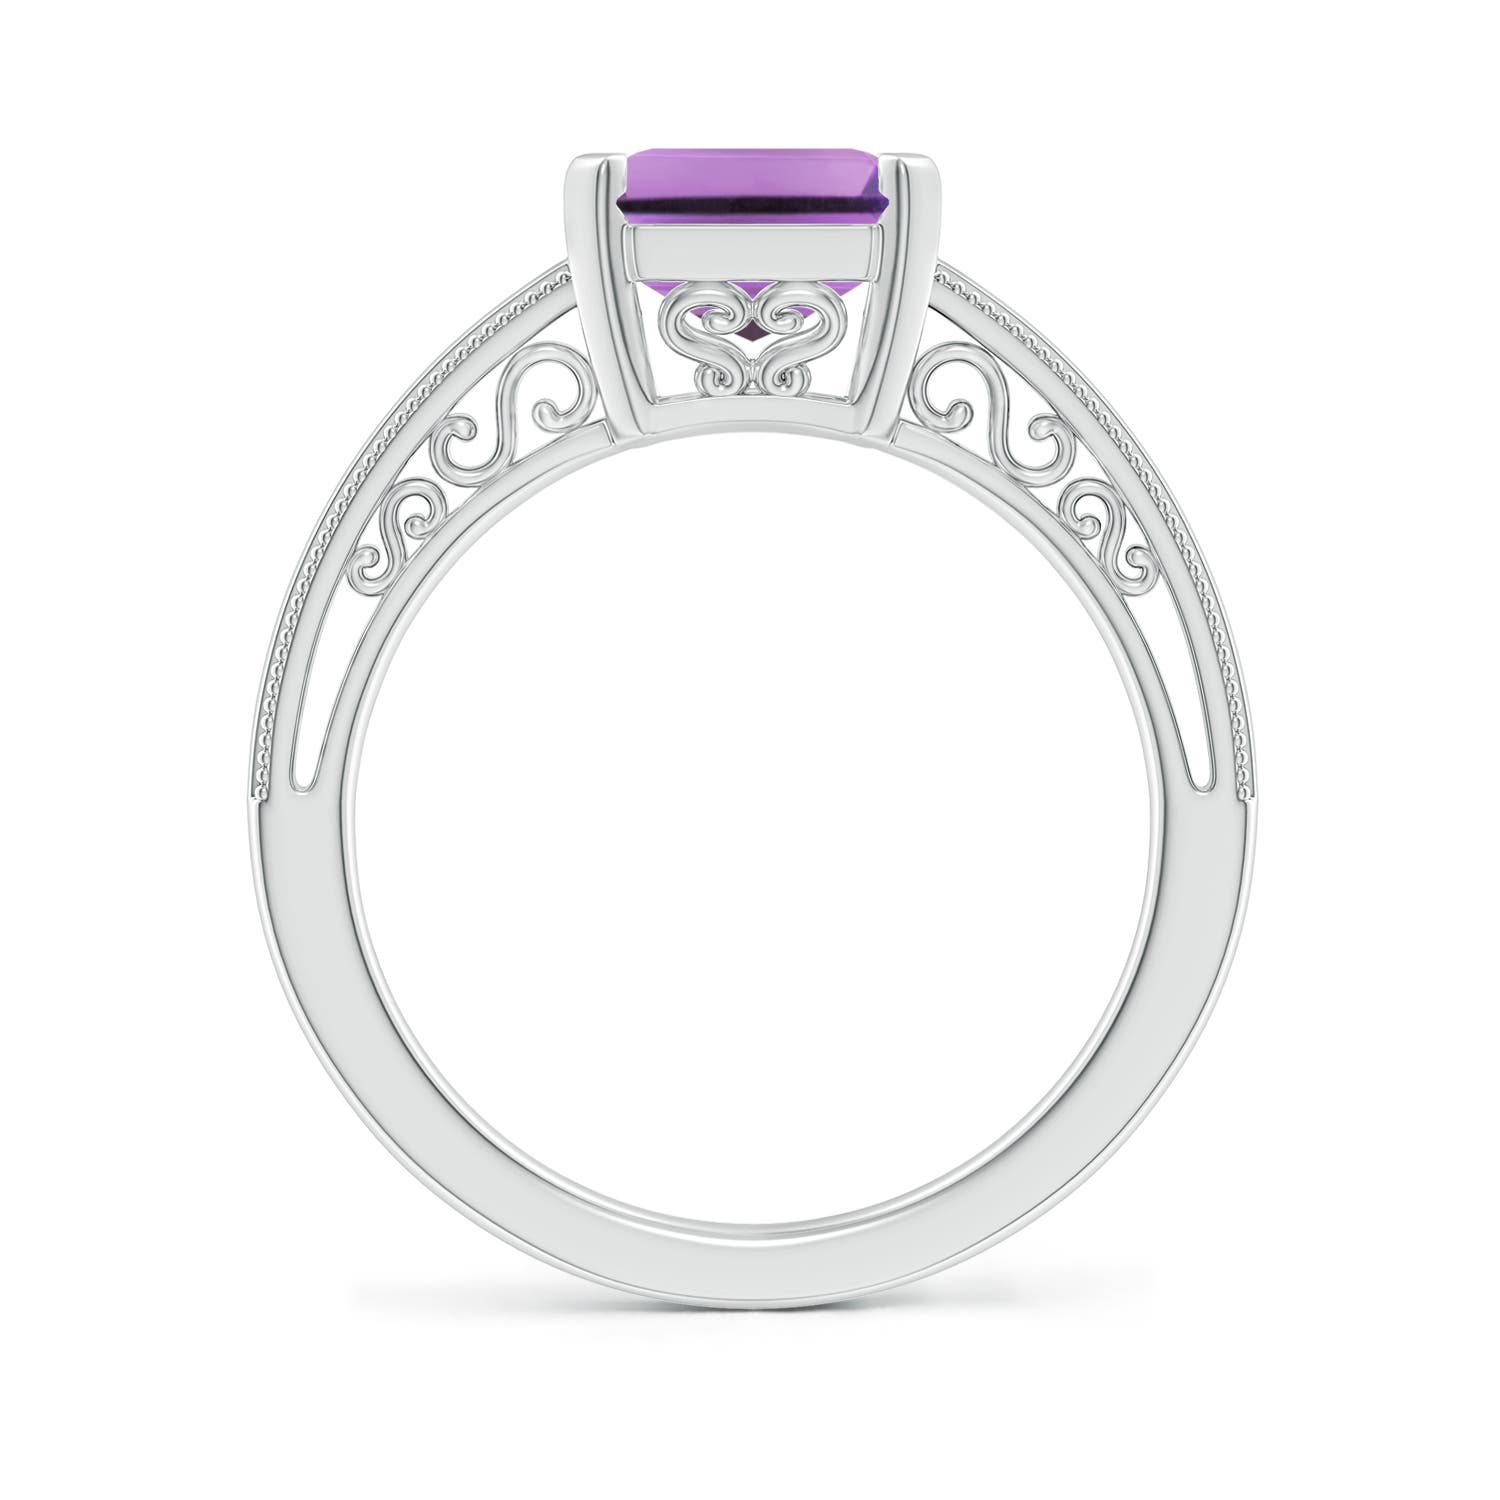 A - Amethyst / 2.9 CT / 14 KT White Gold